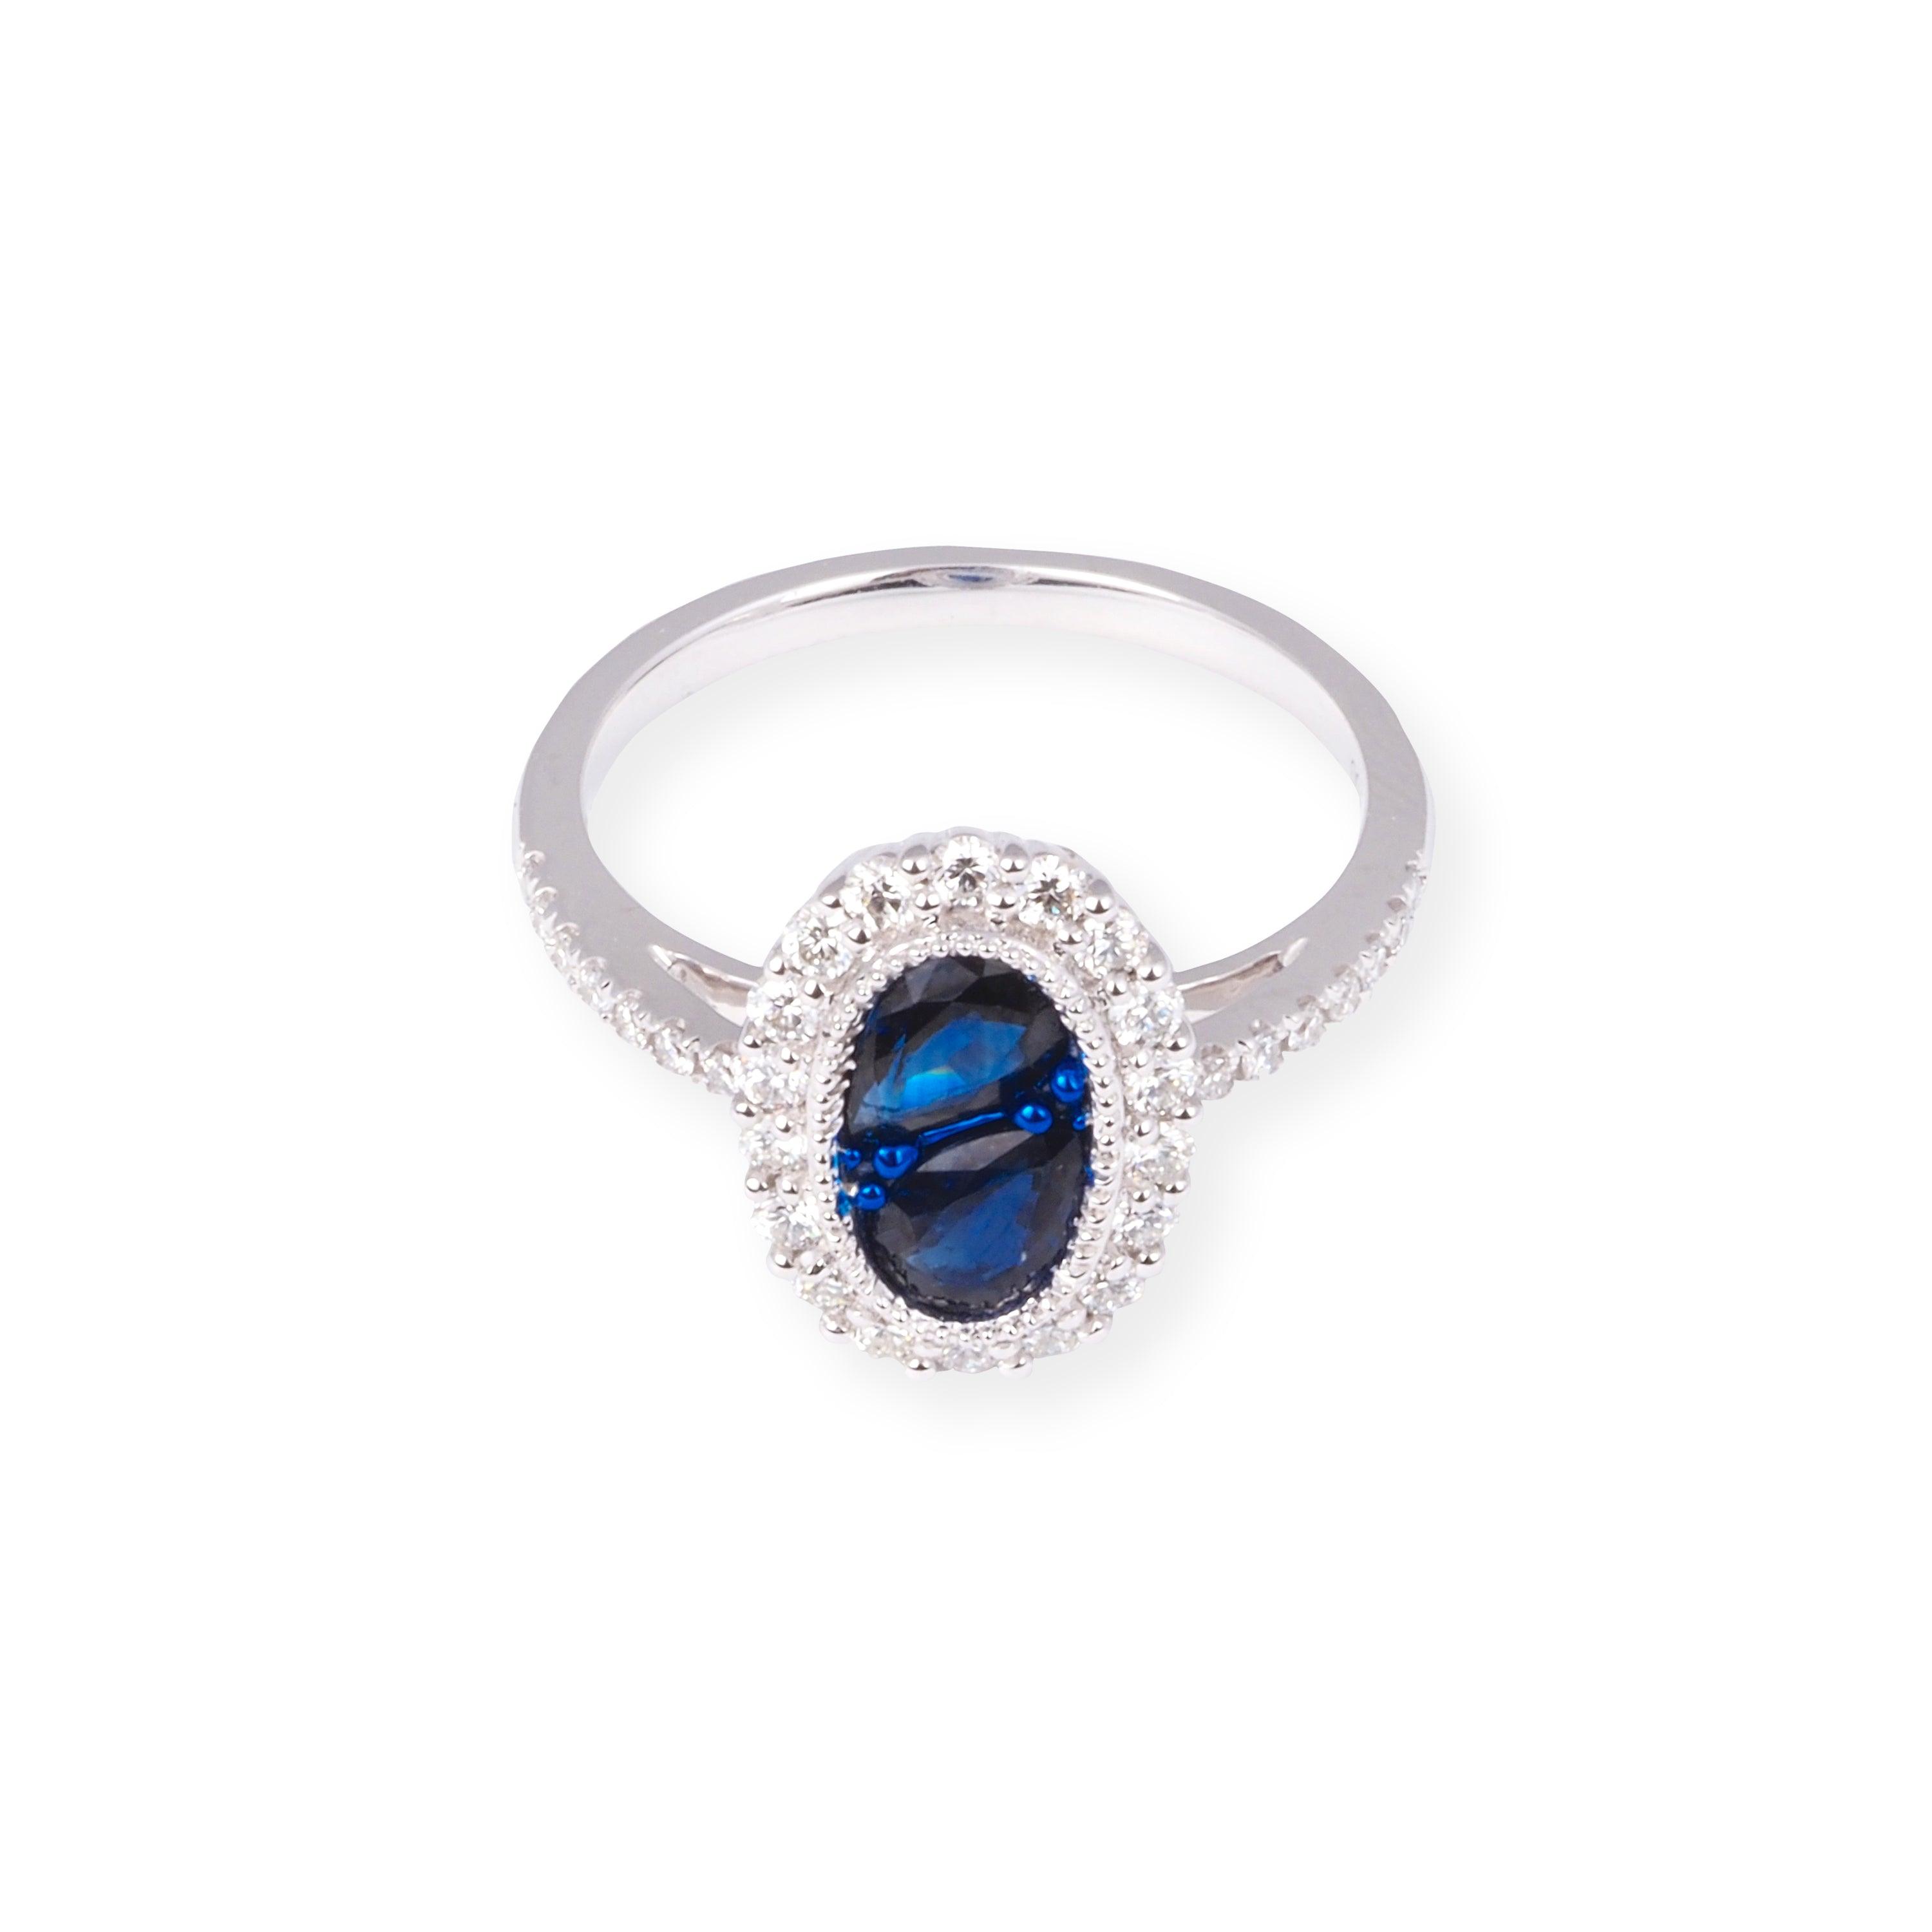 18ct White Gold Oval Shaped Diamond & Blue Sapphire Ring LR-7044 - Minar Jewellers